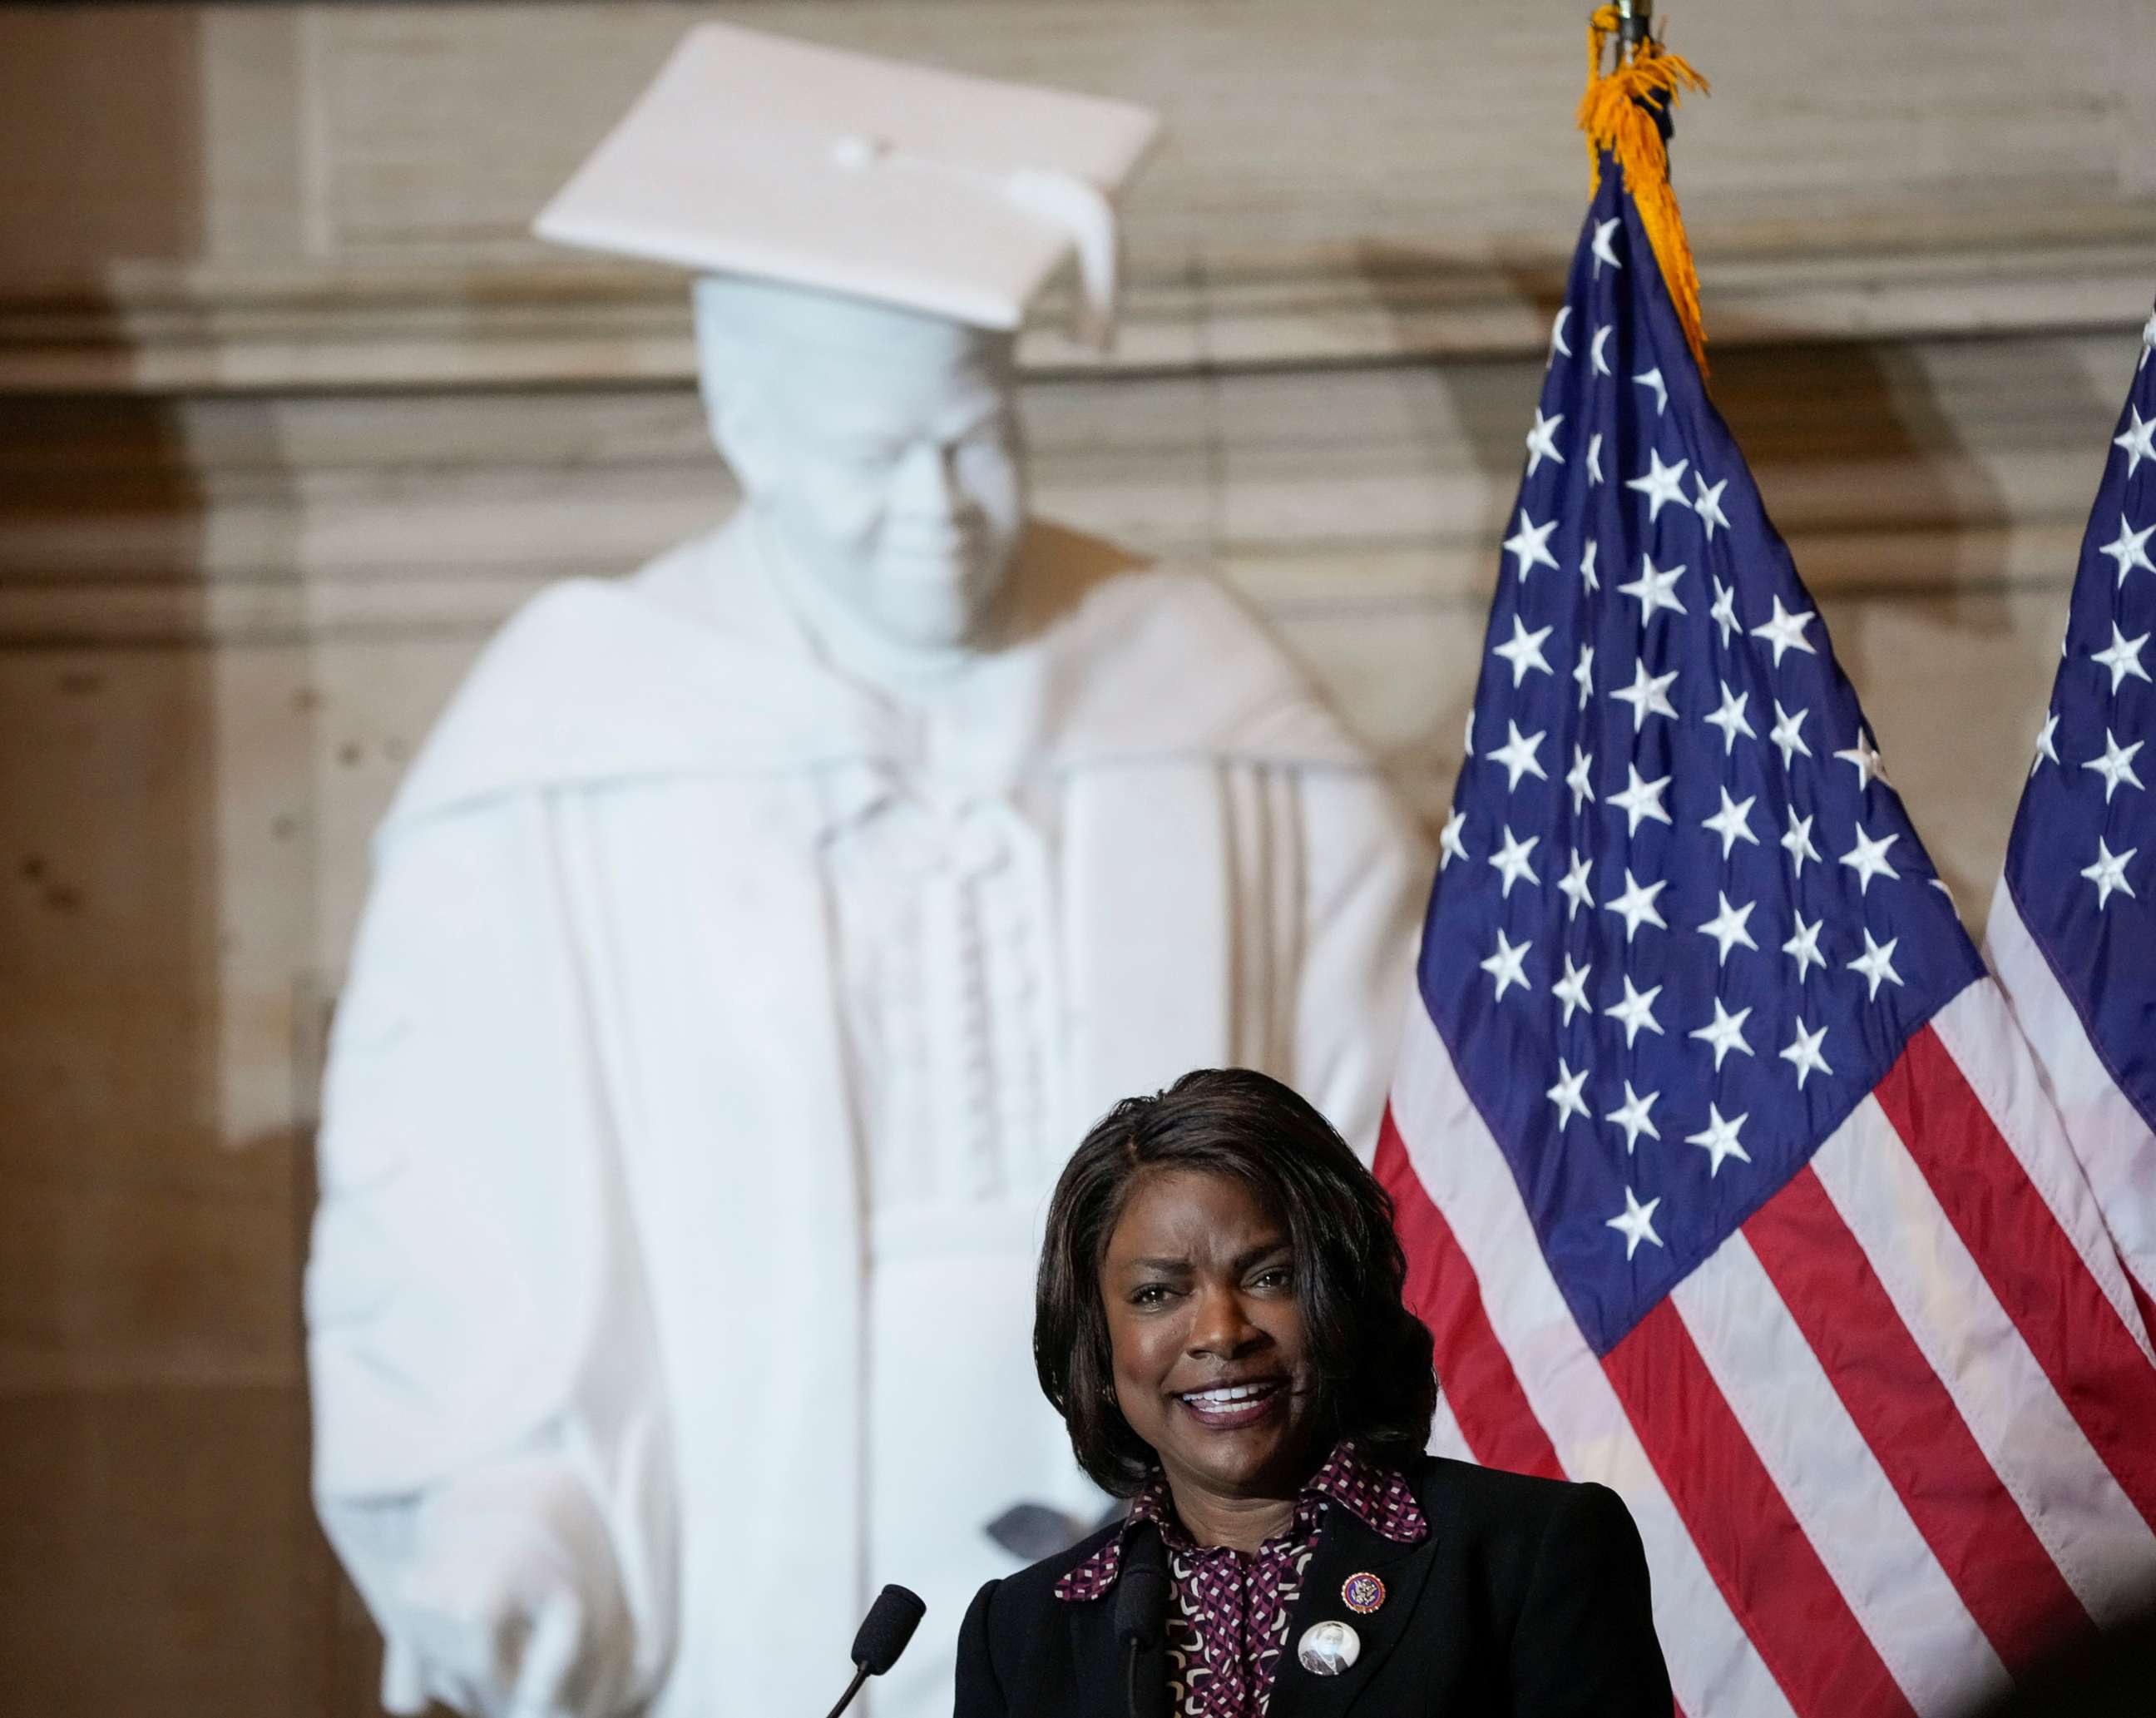 PHOTO: Congresswoman Val Demings speaks during a ceremony at the Capitol, July 13, 2022.